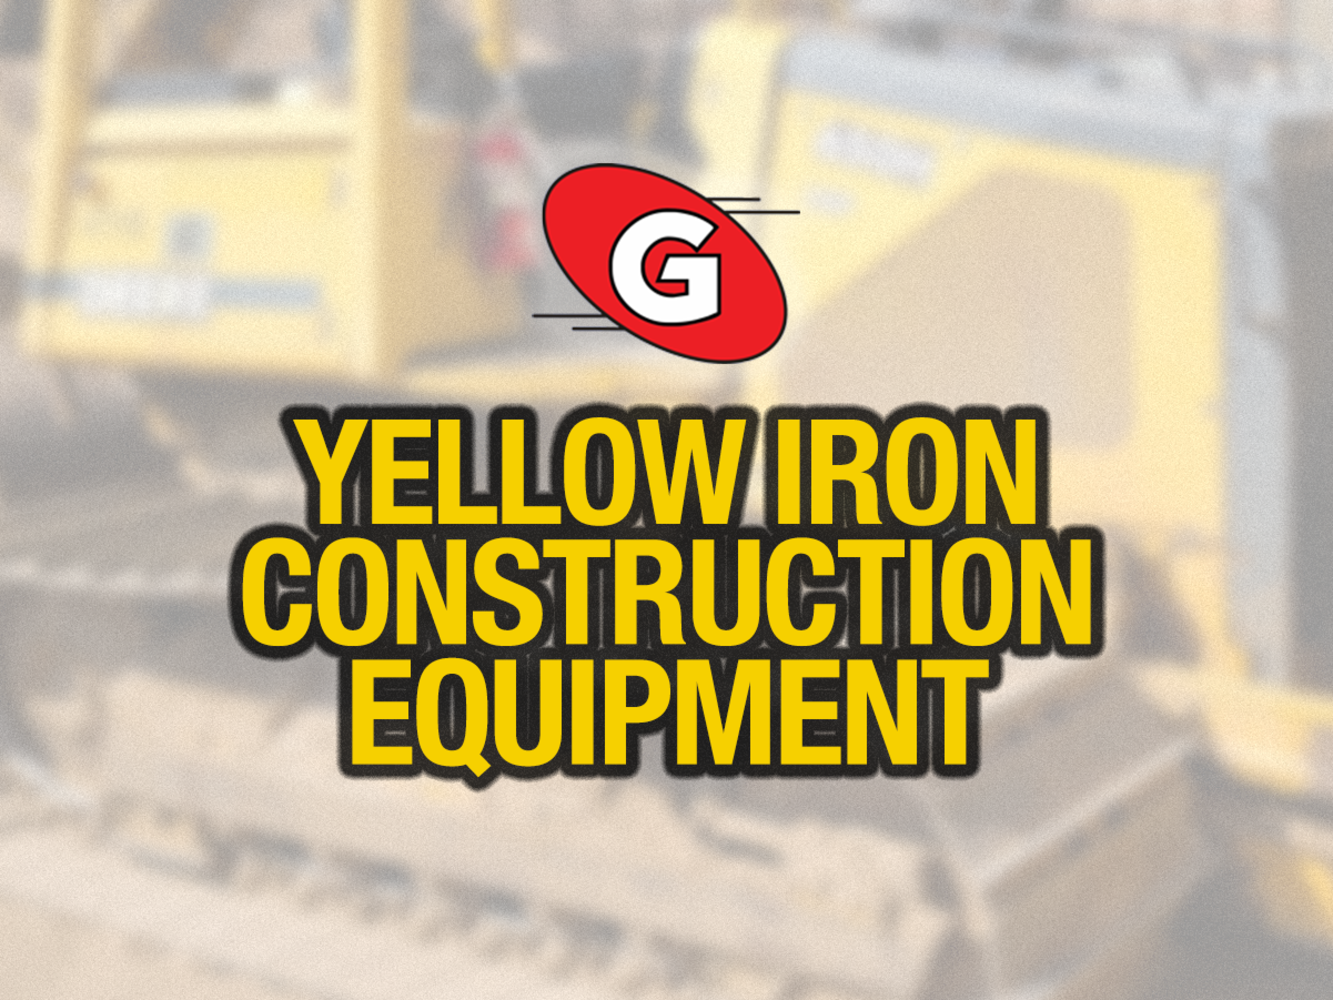 Yellow Iron: Excavators, Dozers, Compactors, Wheel Loaders, Dumps and Support Vehicles Surplus to the ongoing operations of Gerke Excavating